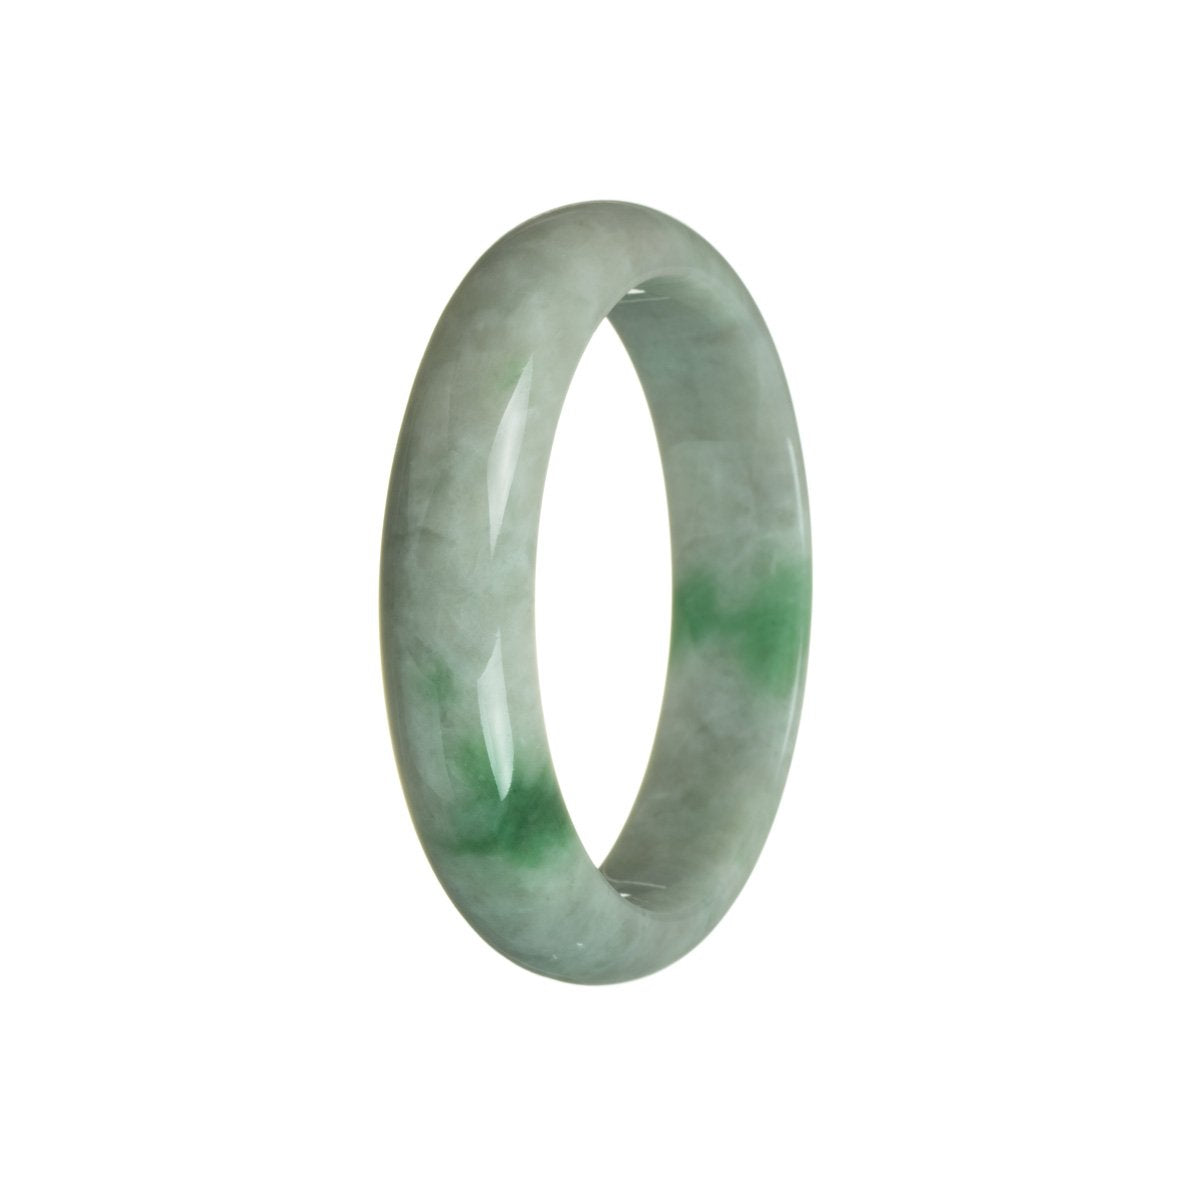 A close-up image of a light grey bracelet made of certified Grade A green jadeite. The bracelet is in the shape of a half moon and measures 58mm in diameter. It is a stylish piece of jewelry from the brand MAYS.